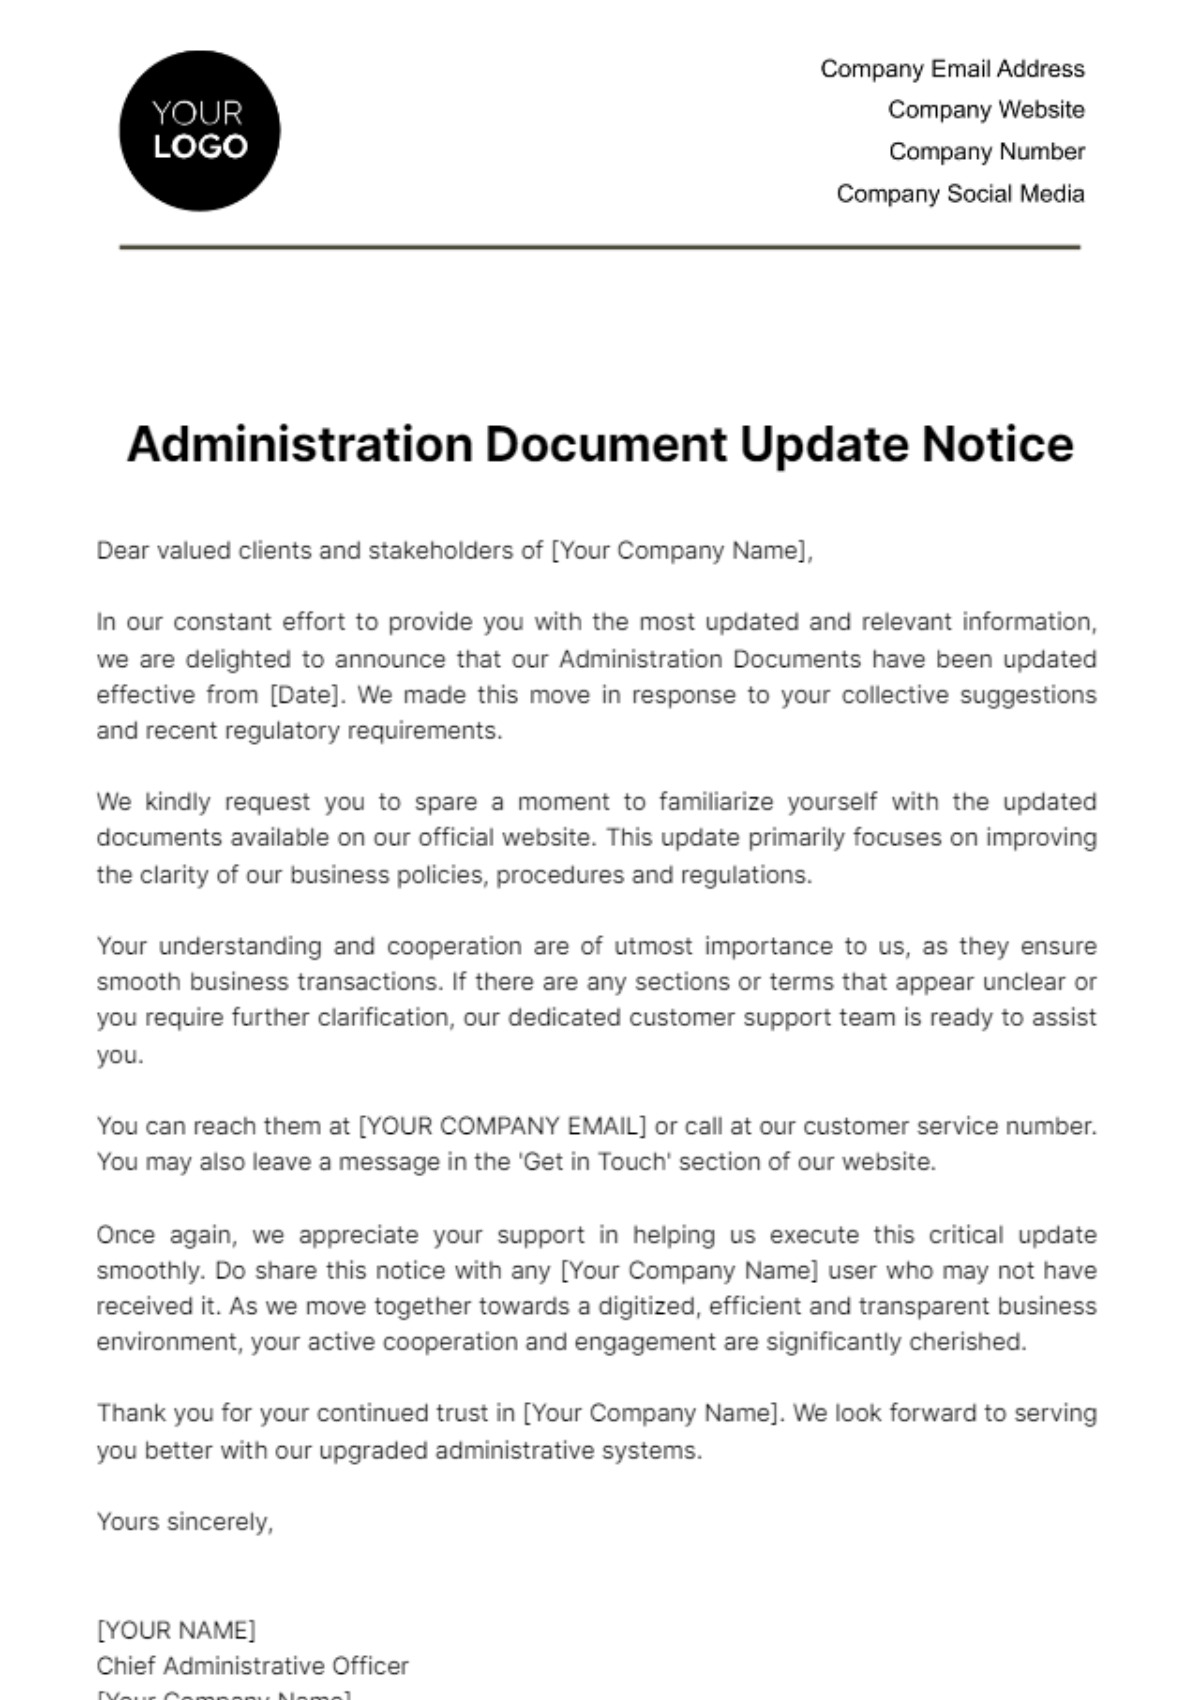 Administration Document Update Notice Template